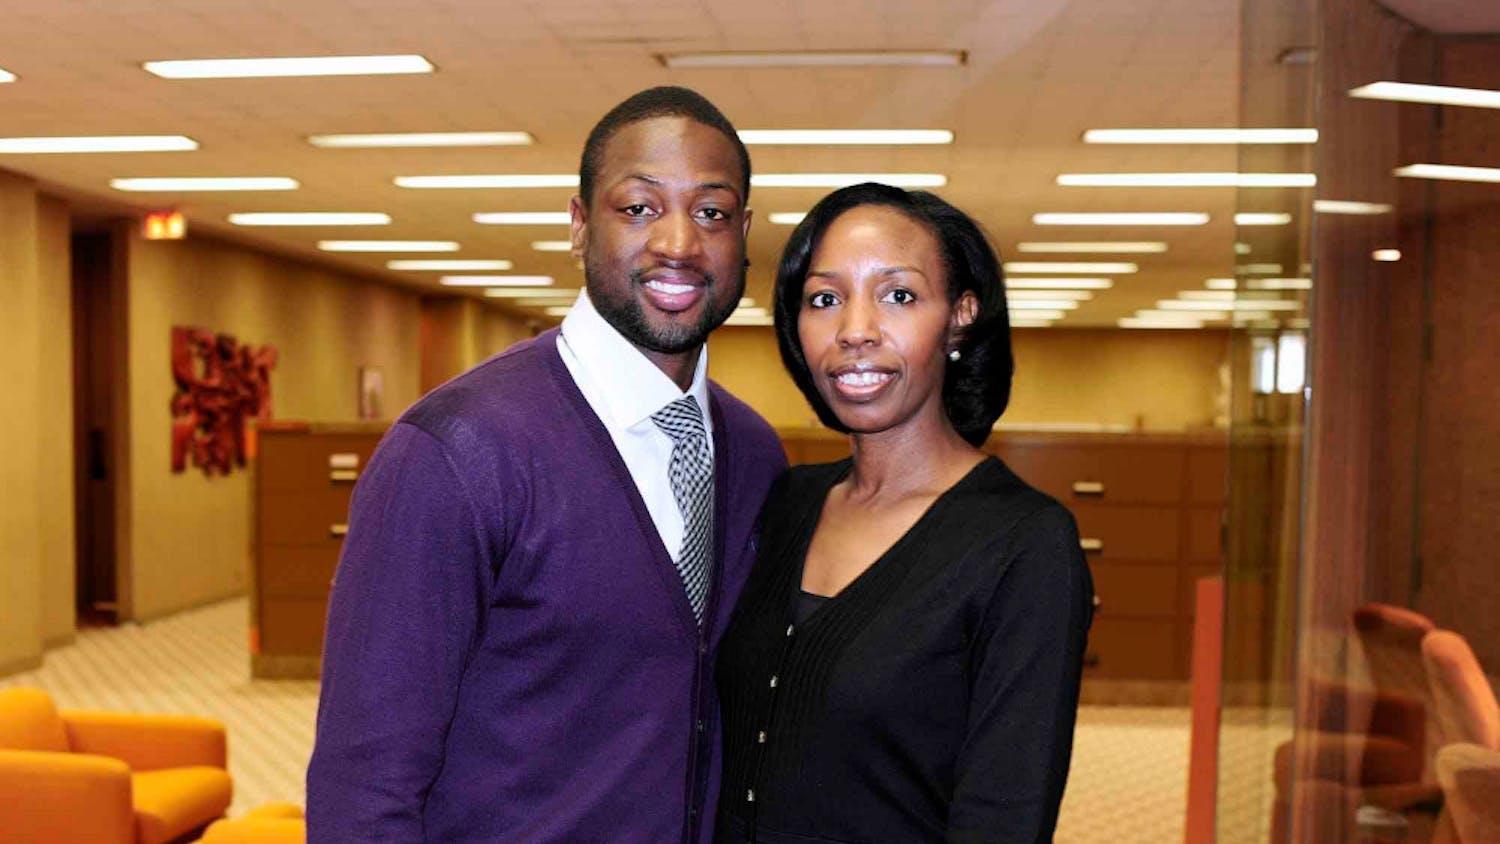 Dwayne Wade is one of the many celebrities Mira Lowe interviewed during her time at JET magazine.